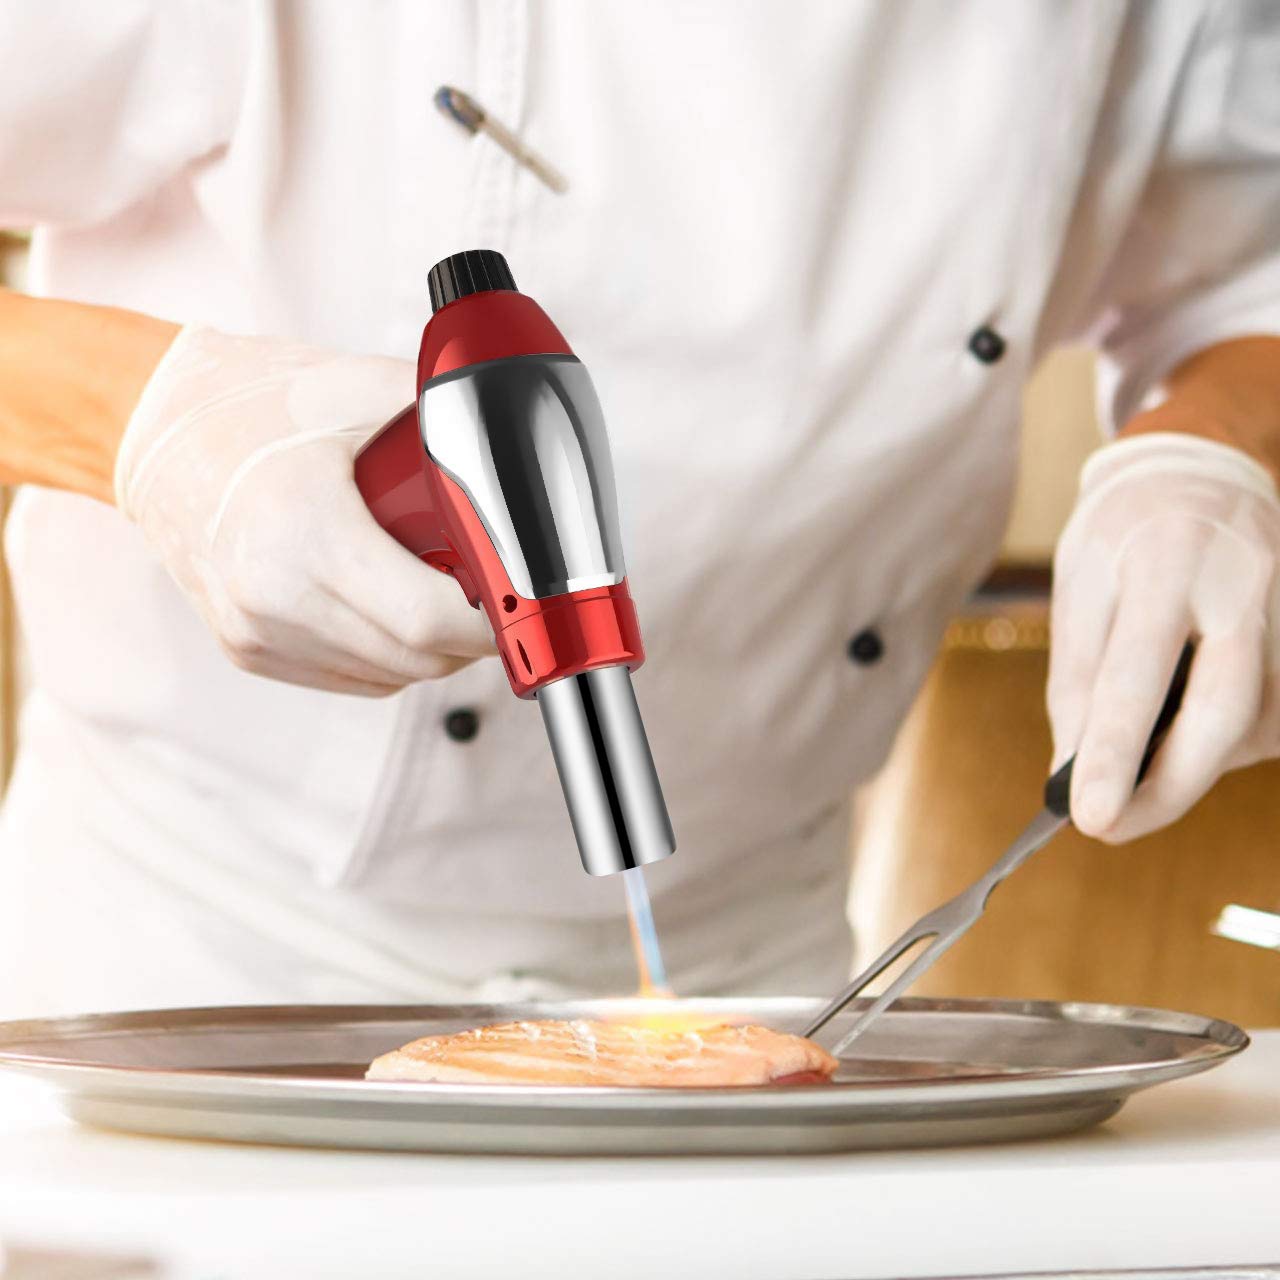 ZEBRE Butane Torch, Refillable Culinary Torch Kitchen Blow Torch Lighter with Adjustable Flame for Desserts, Creme Brulee, BBQ and Baking (Butane Gas Not Included) (Red)